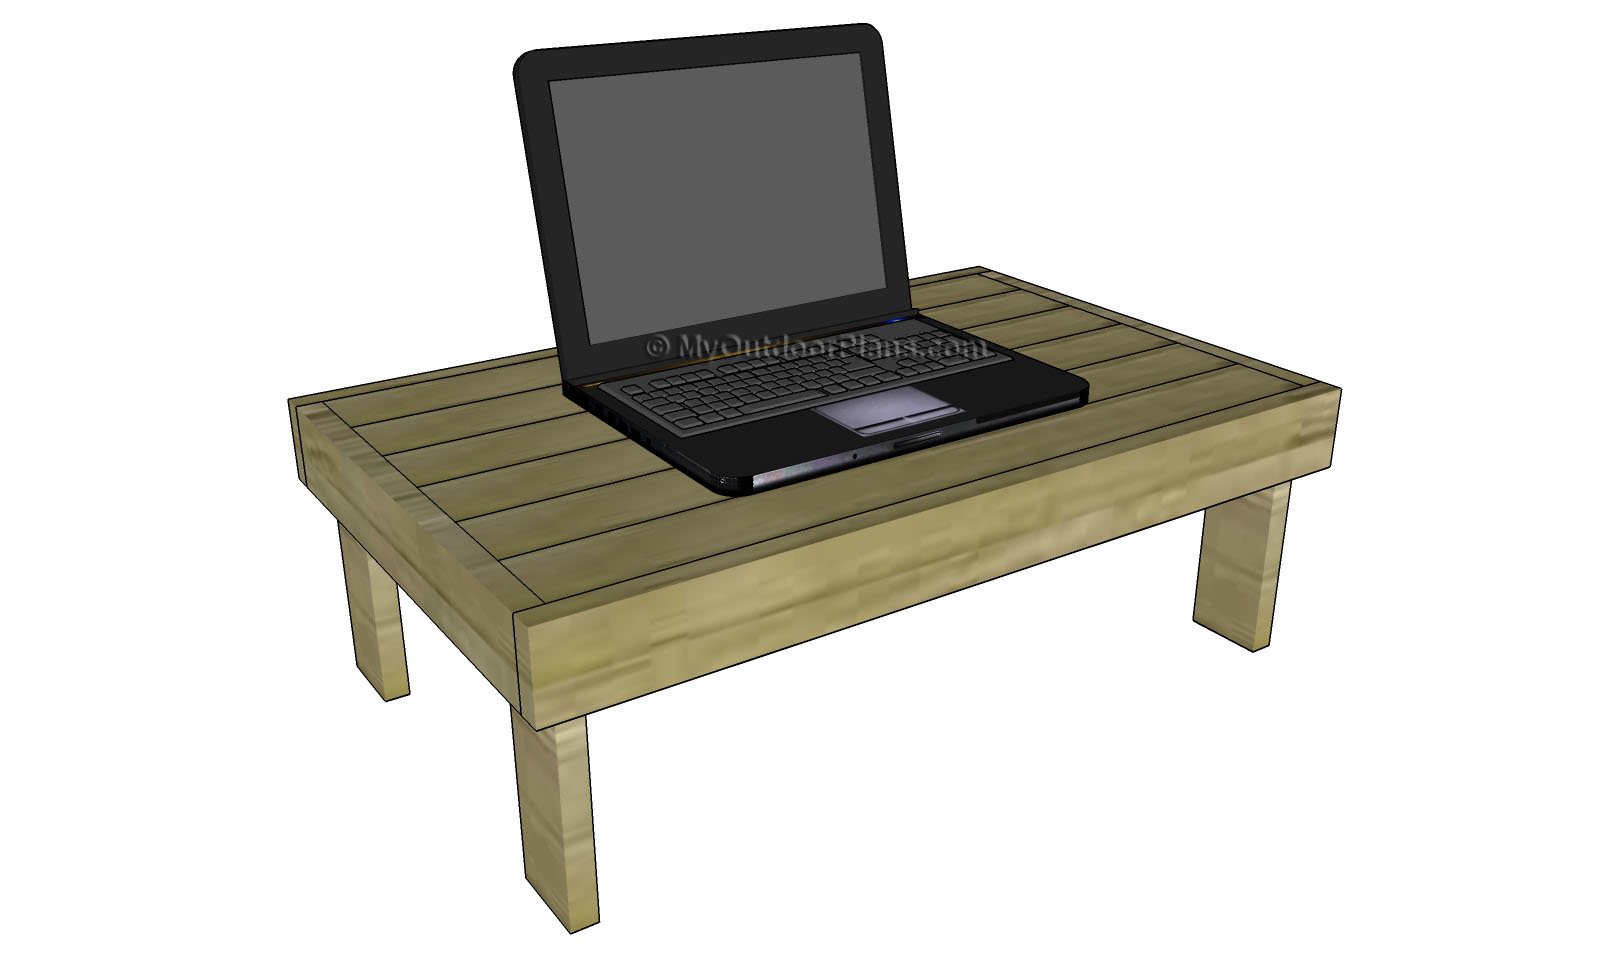 Lap Desk Plans | Free Outdoor Plans - DIY Shed, Wooden Playhouse, Bbq 